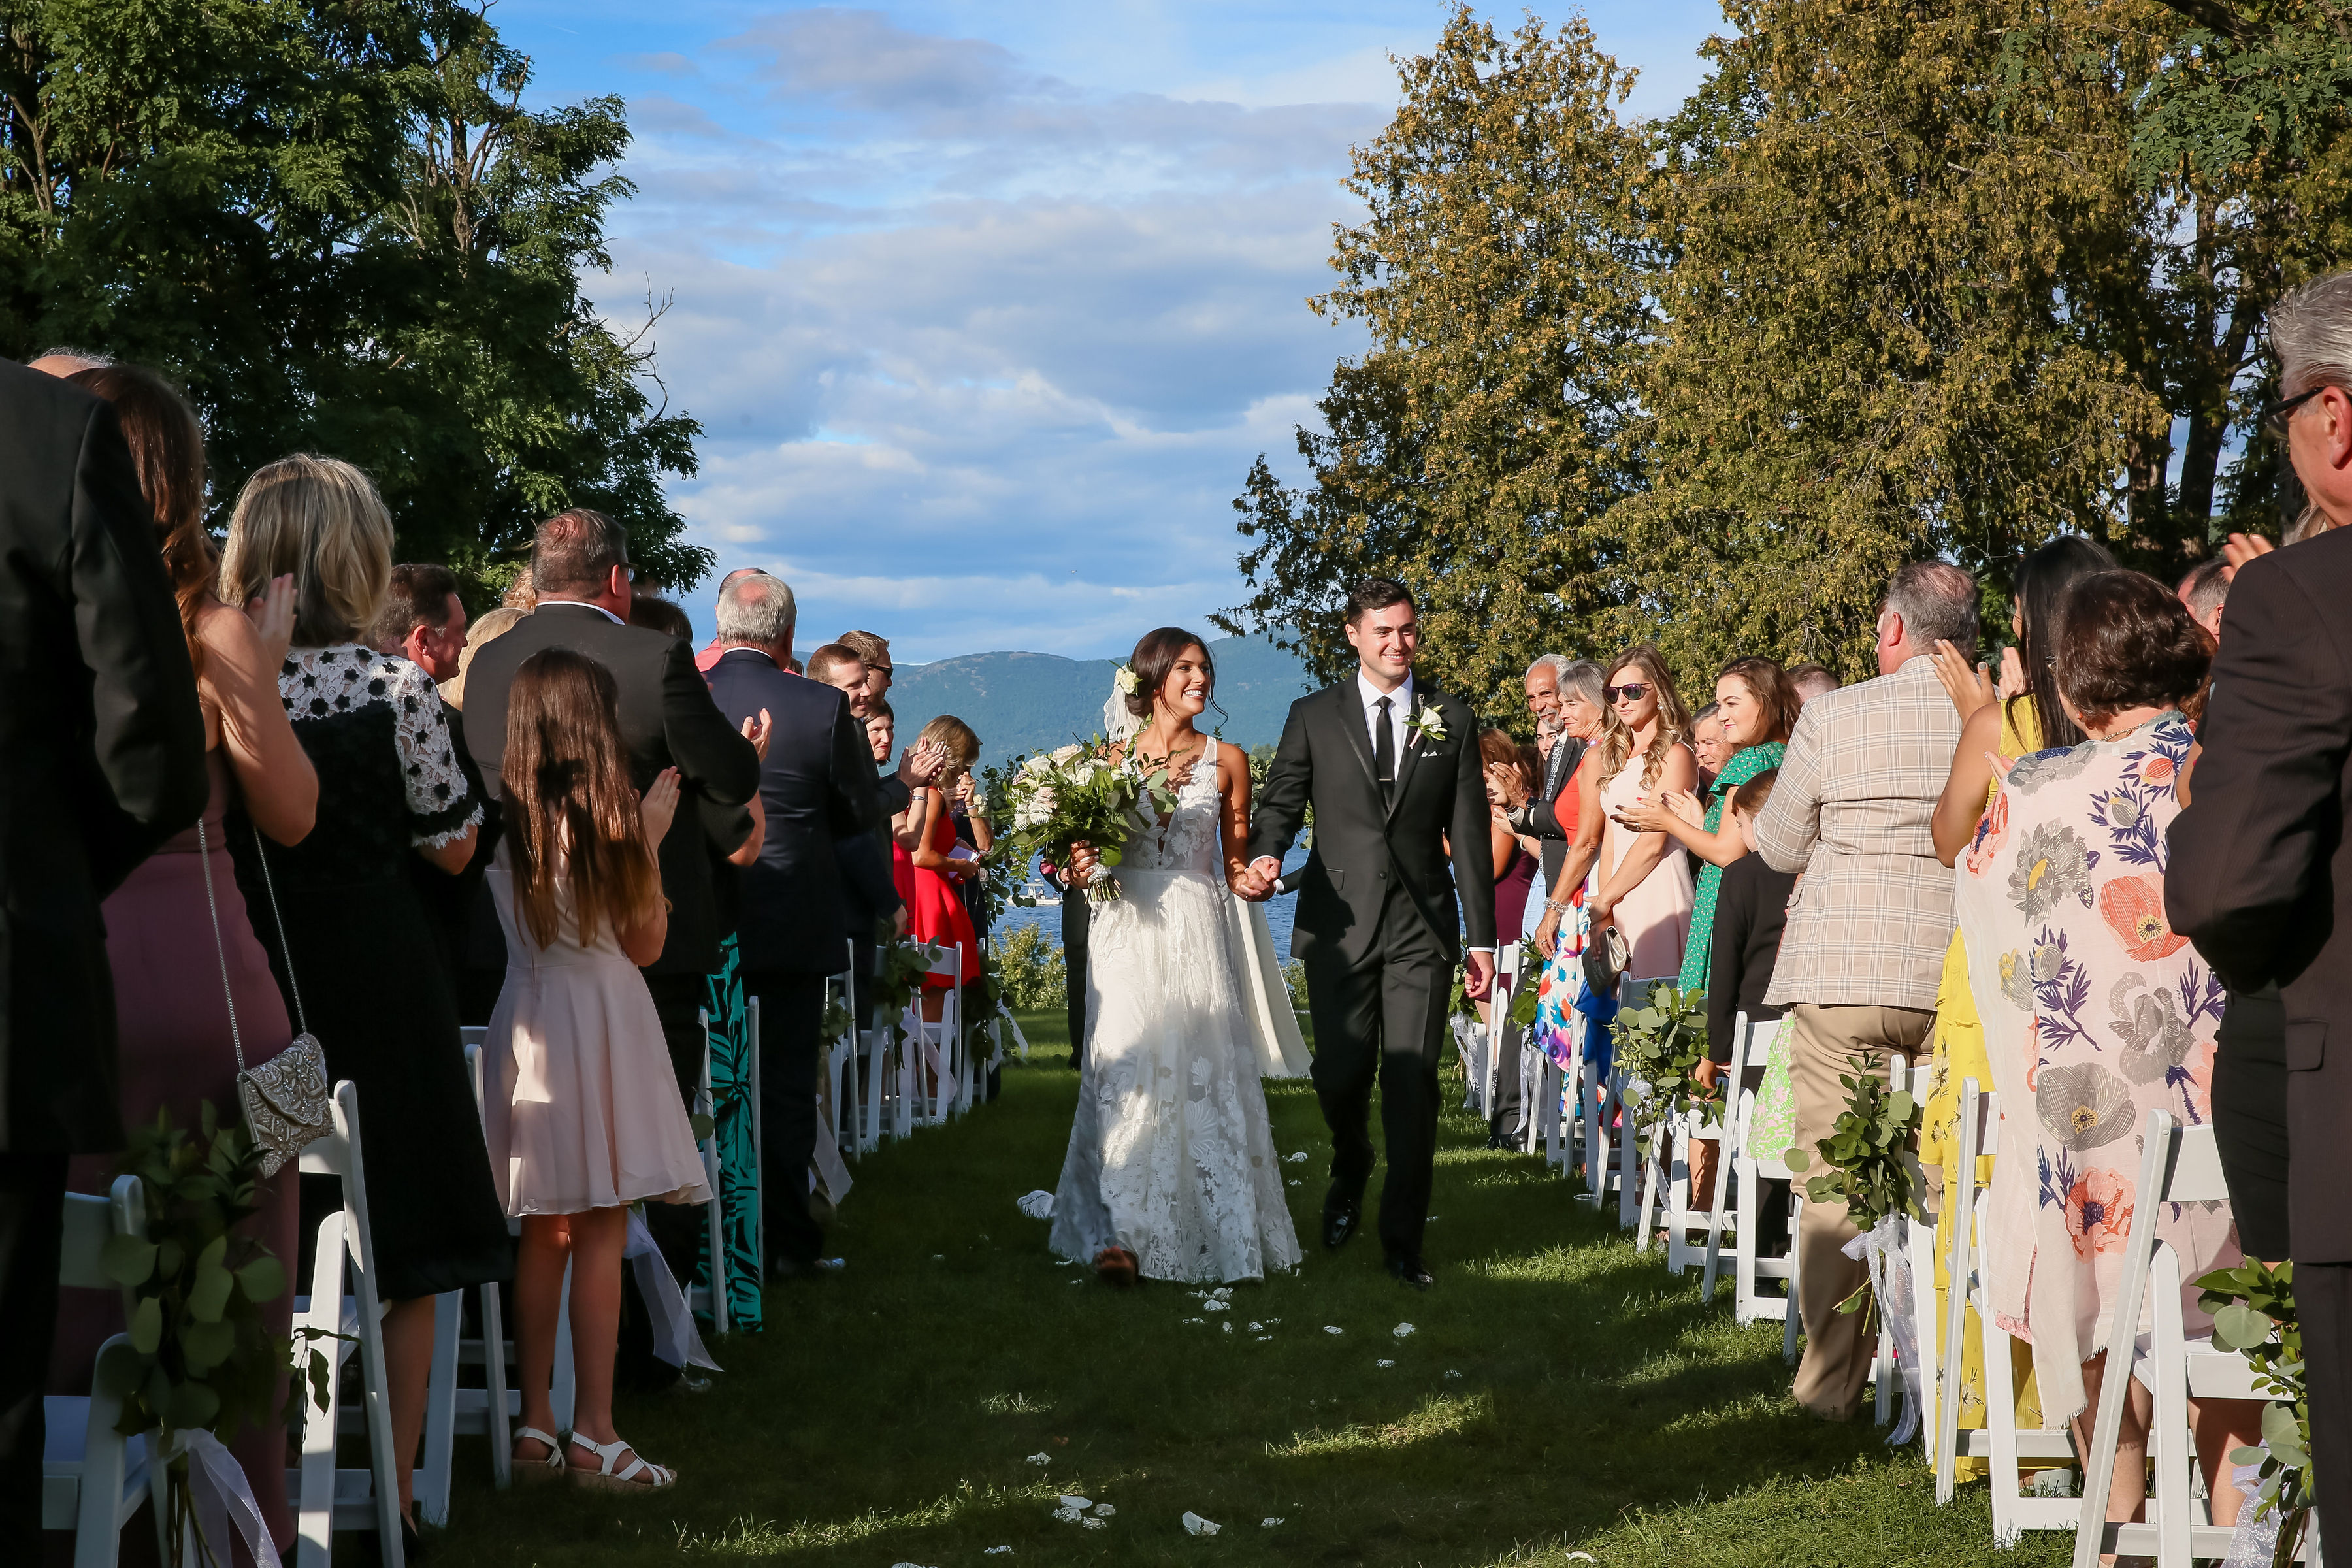 Happy newlyweds walk down the aisle as guests stand to either side. Mountains in the background